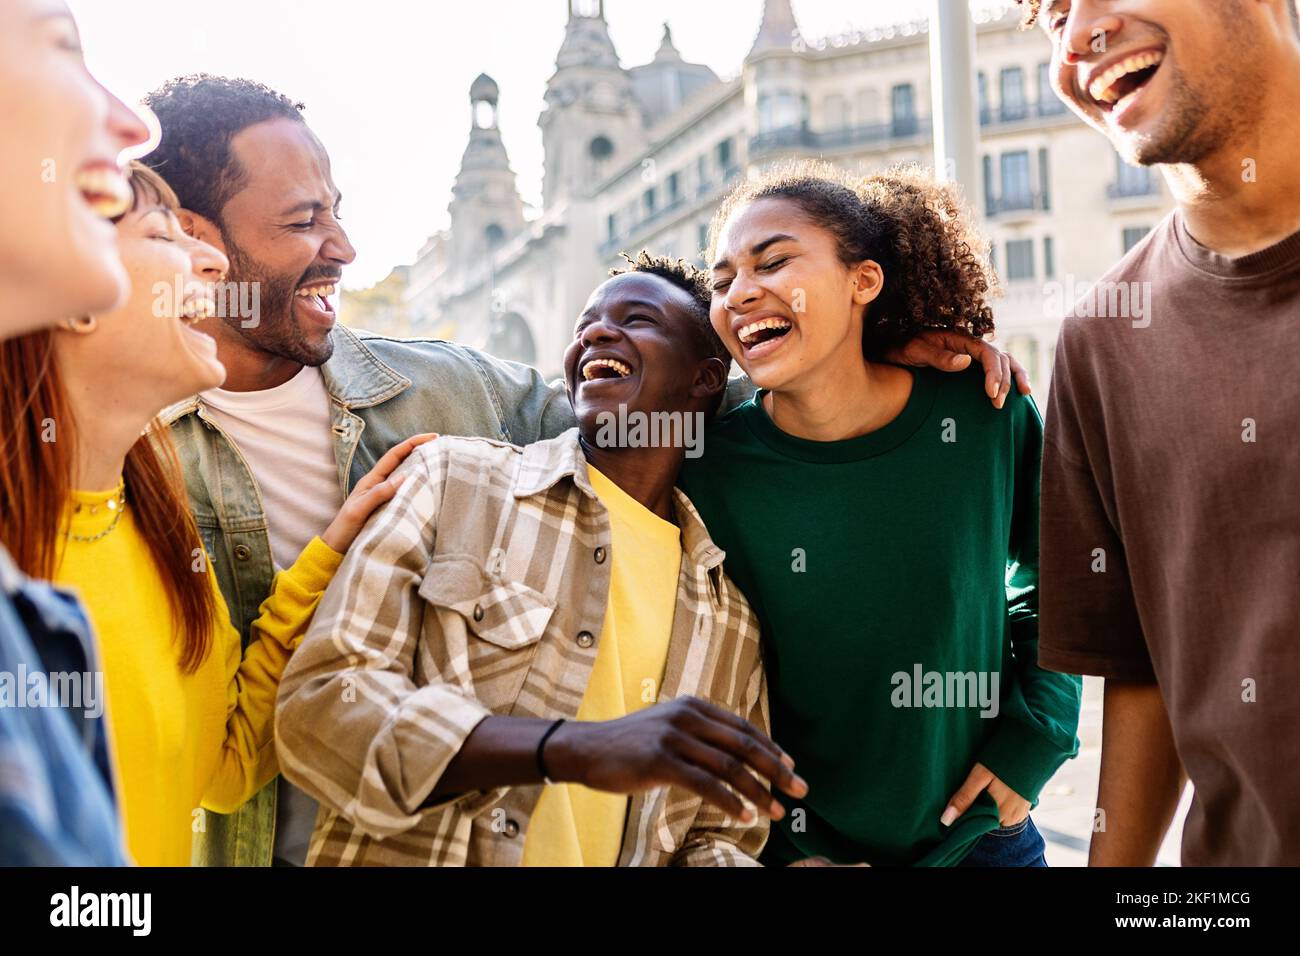 Young group of happy people having fun outdoors Stock Photo